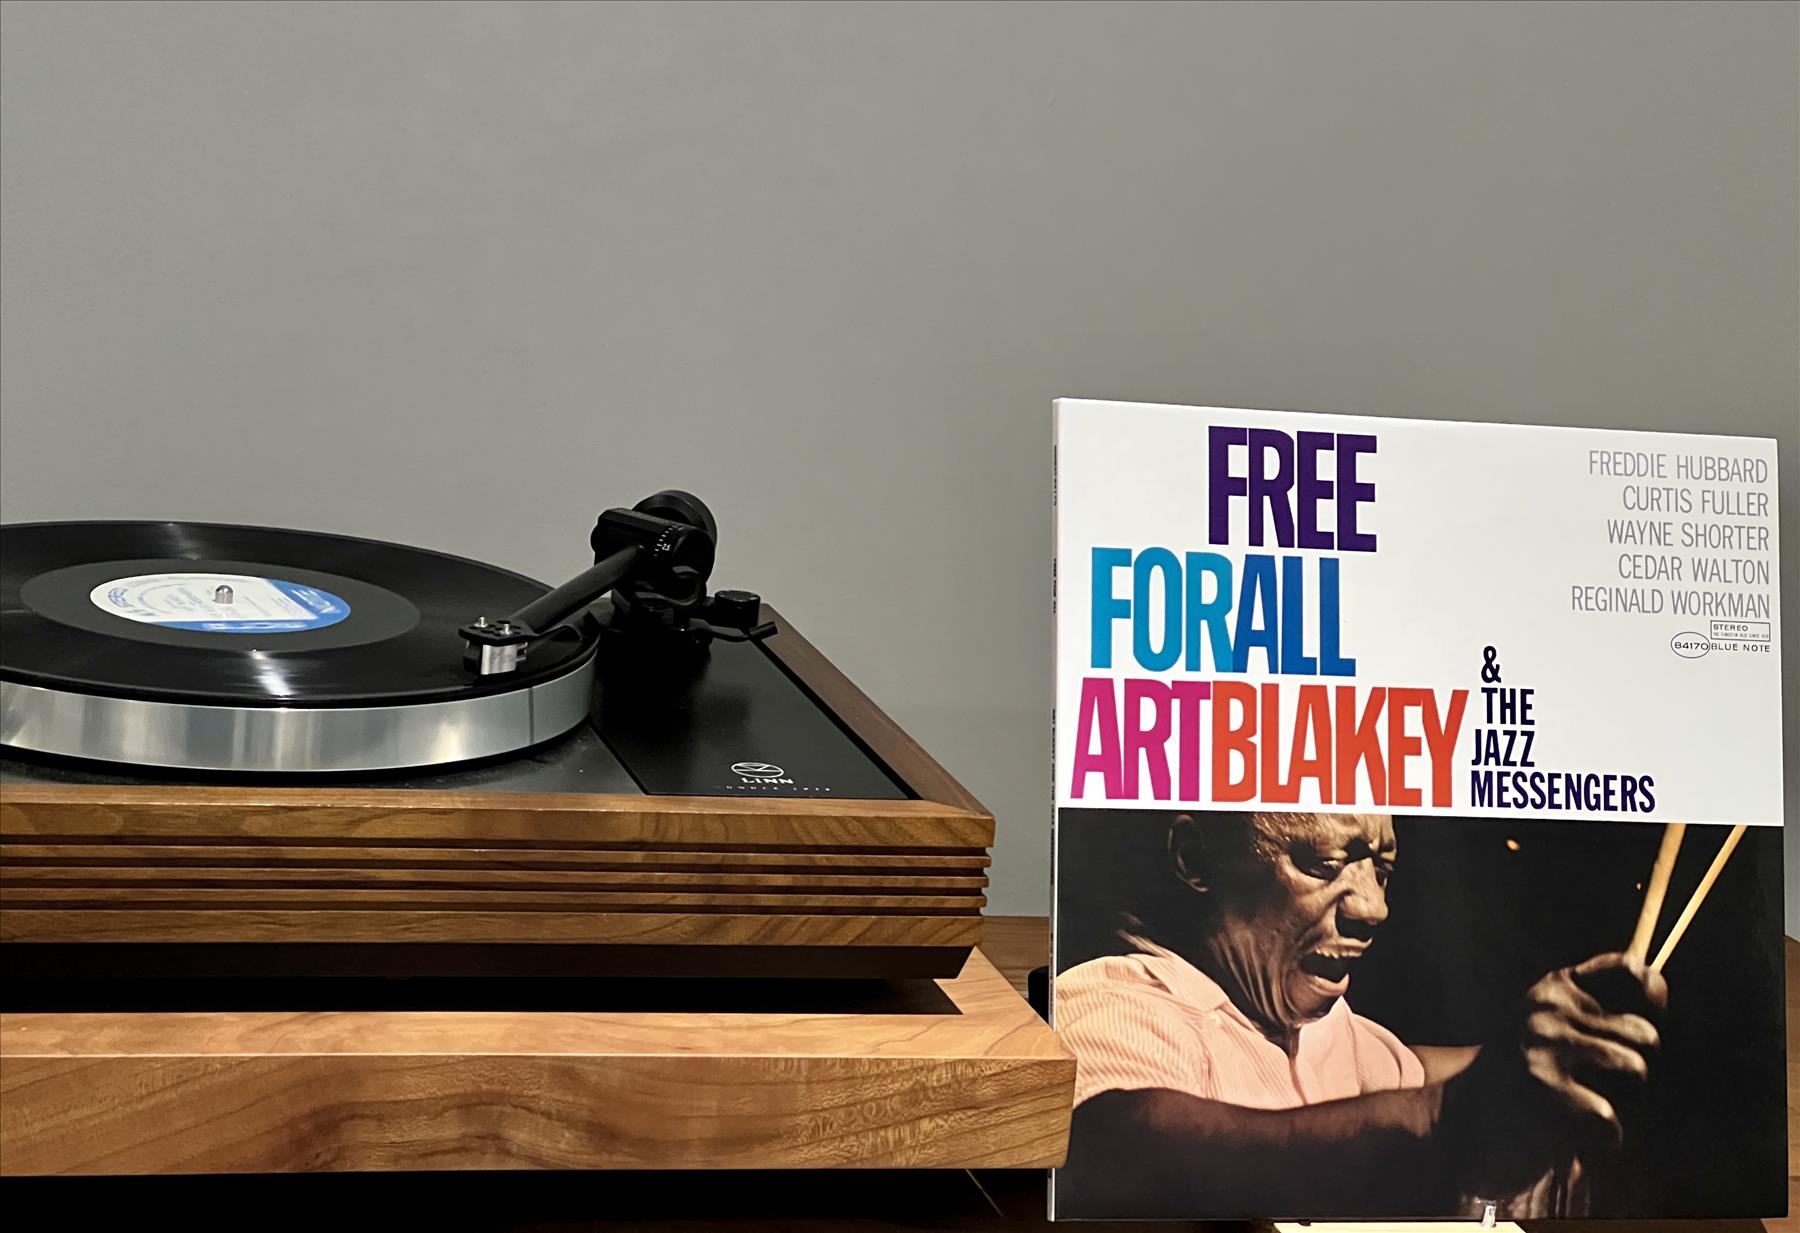 Free for All: The best Art Blakey and The Jazz Messengers record?